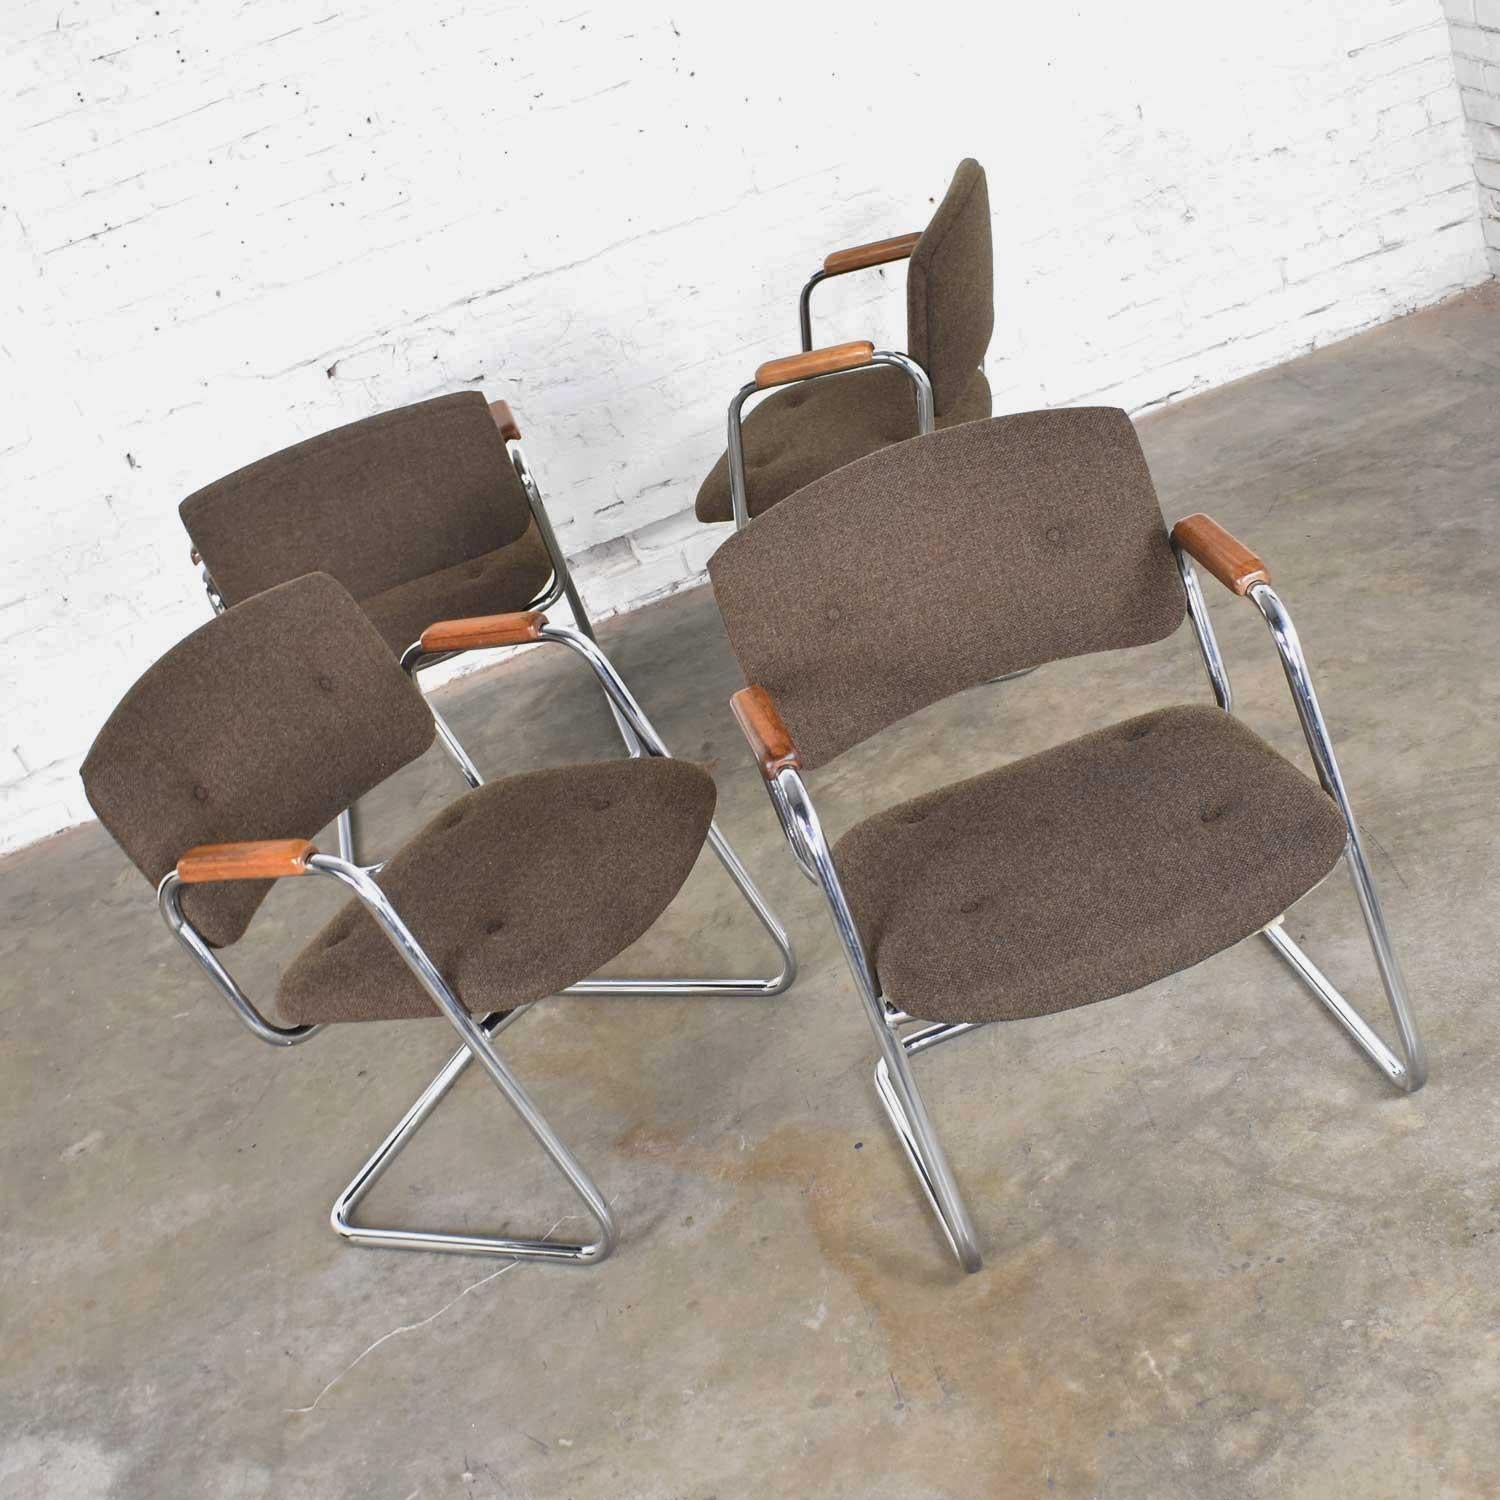 4 Cantilever Armchairs Chrome Brown w/ Wood Arms Style of Steelcase or Pollock 4